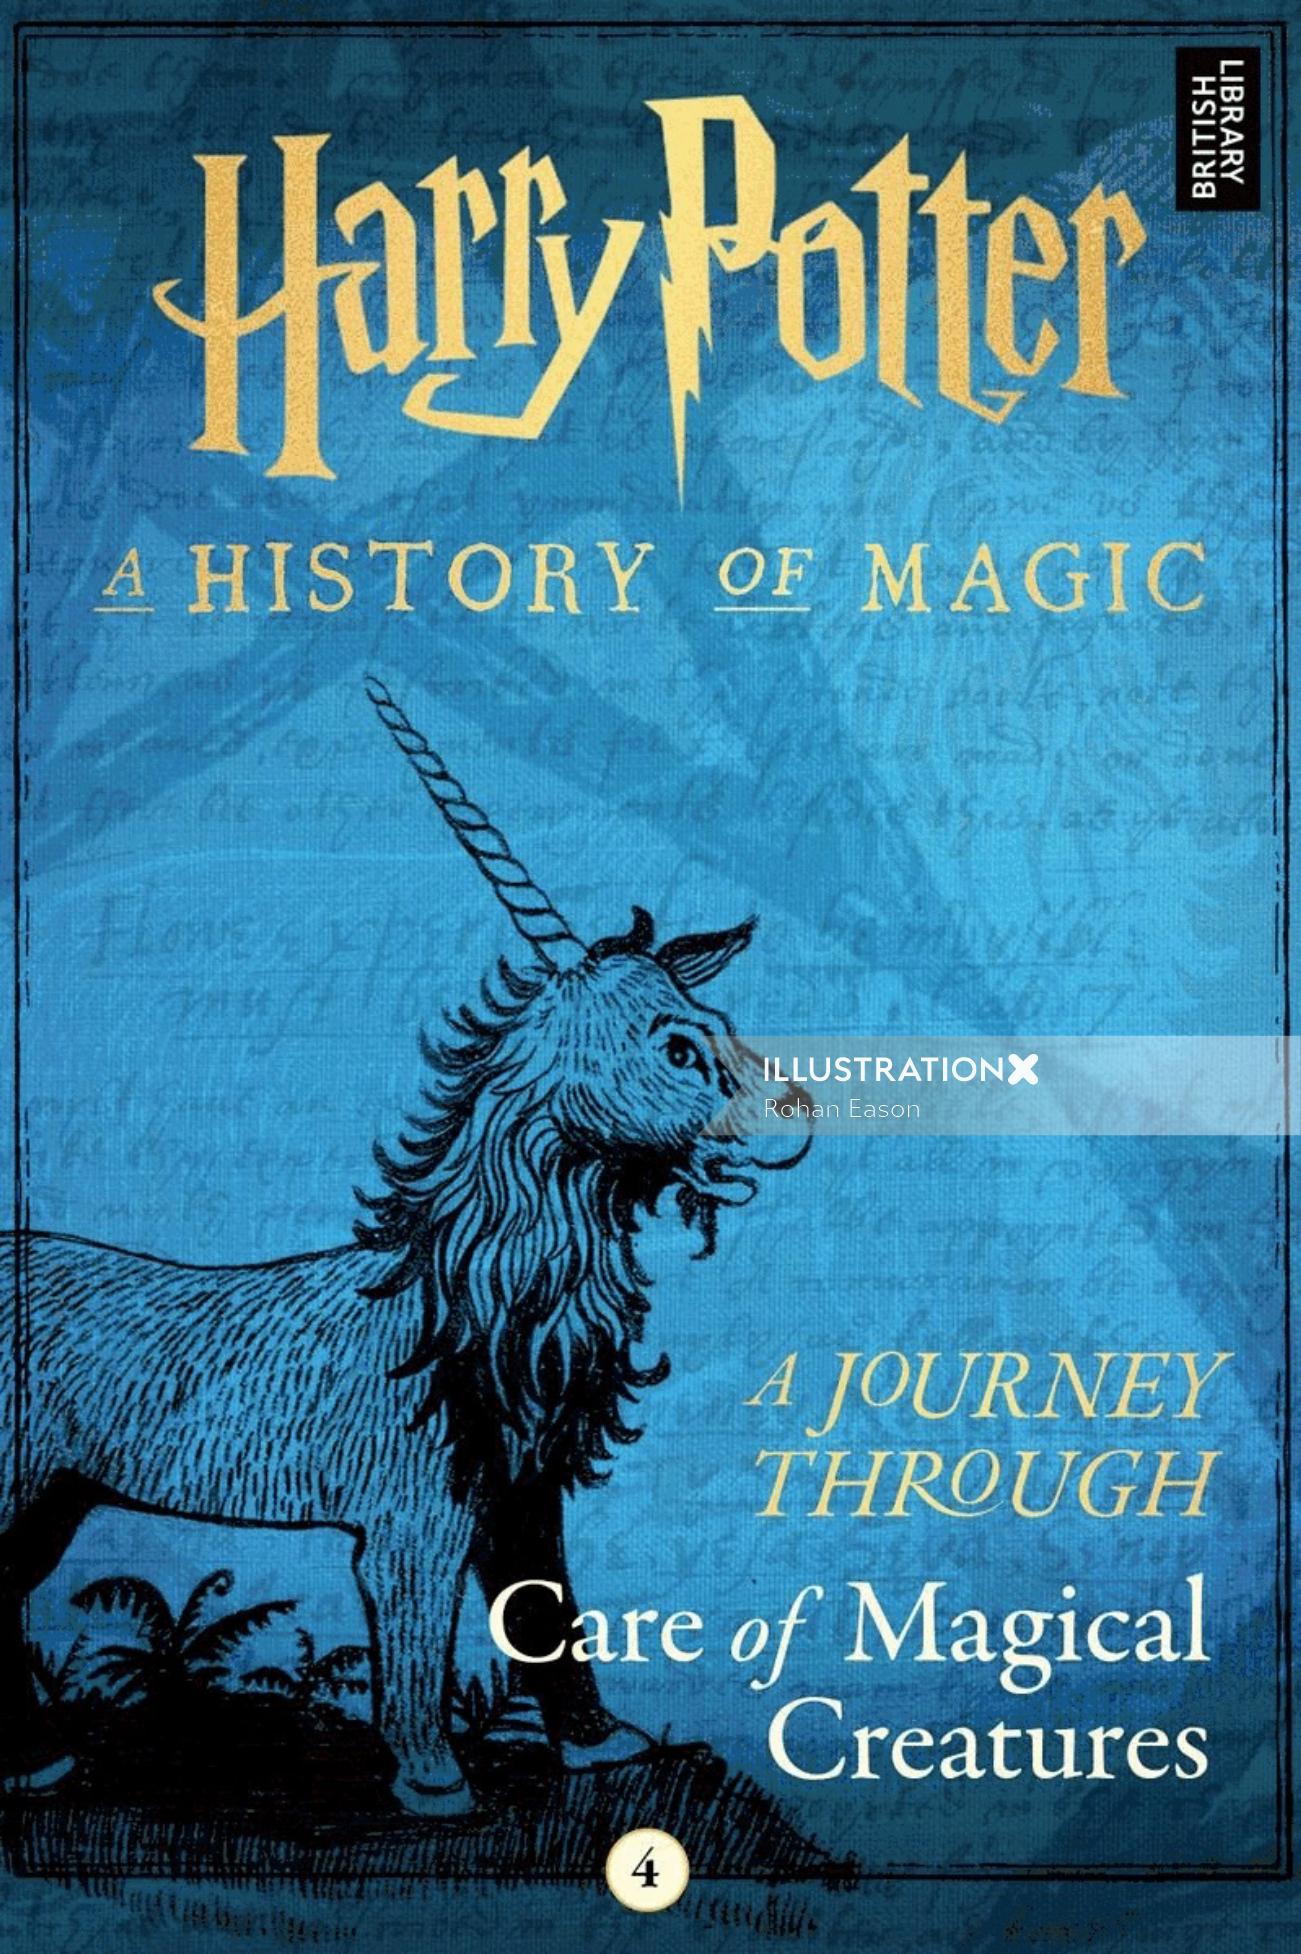 Book Covers Harry Potter A history of magic
